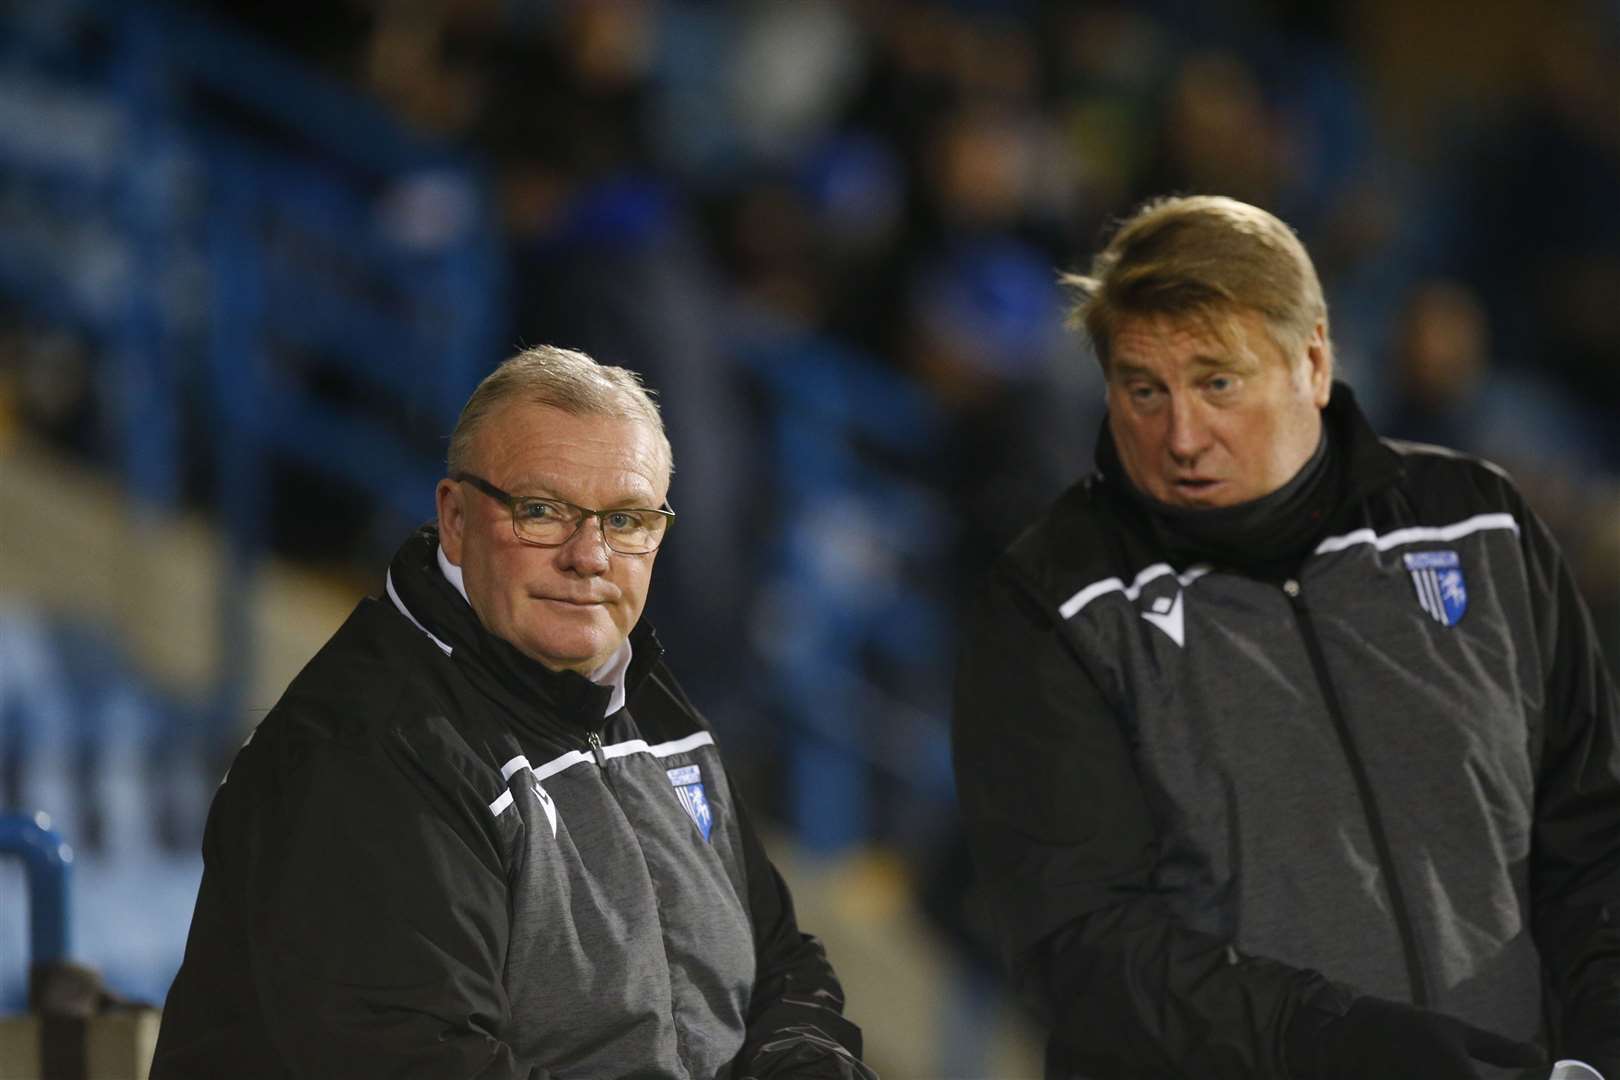 Gillingham to assess squad ahead of scheduled match with Ipswich Town